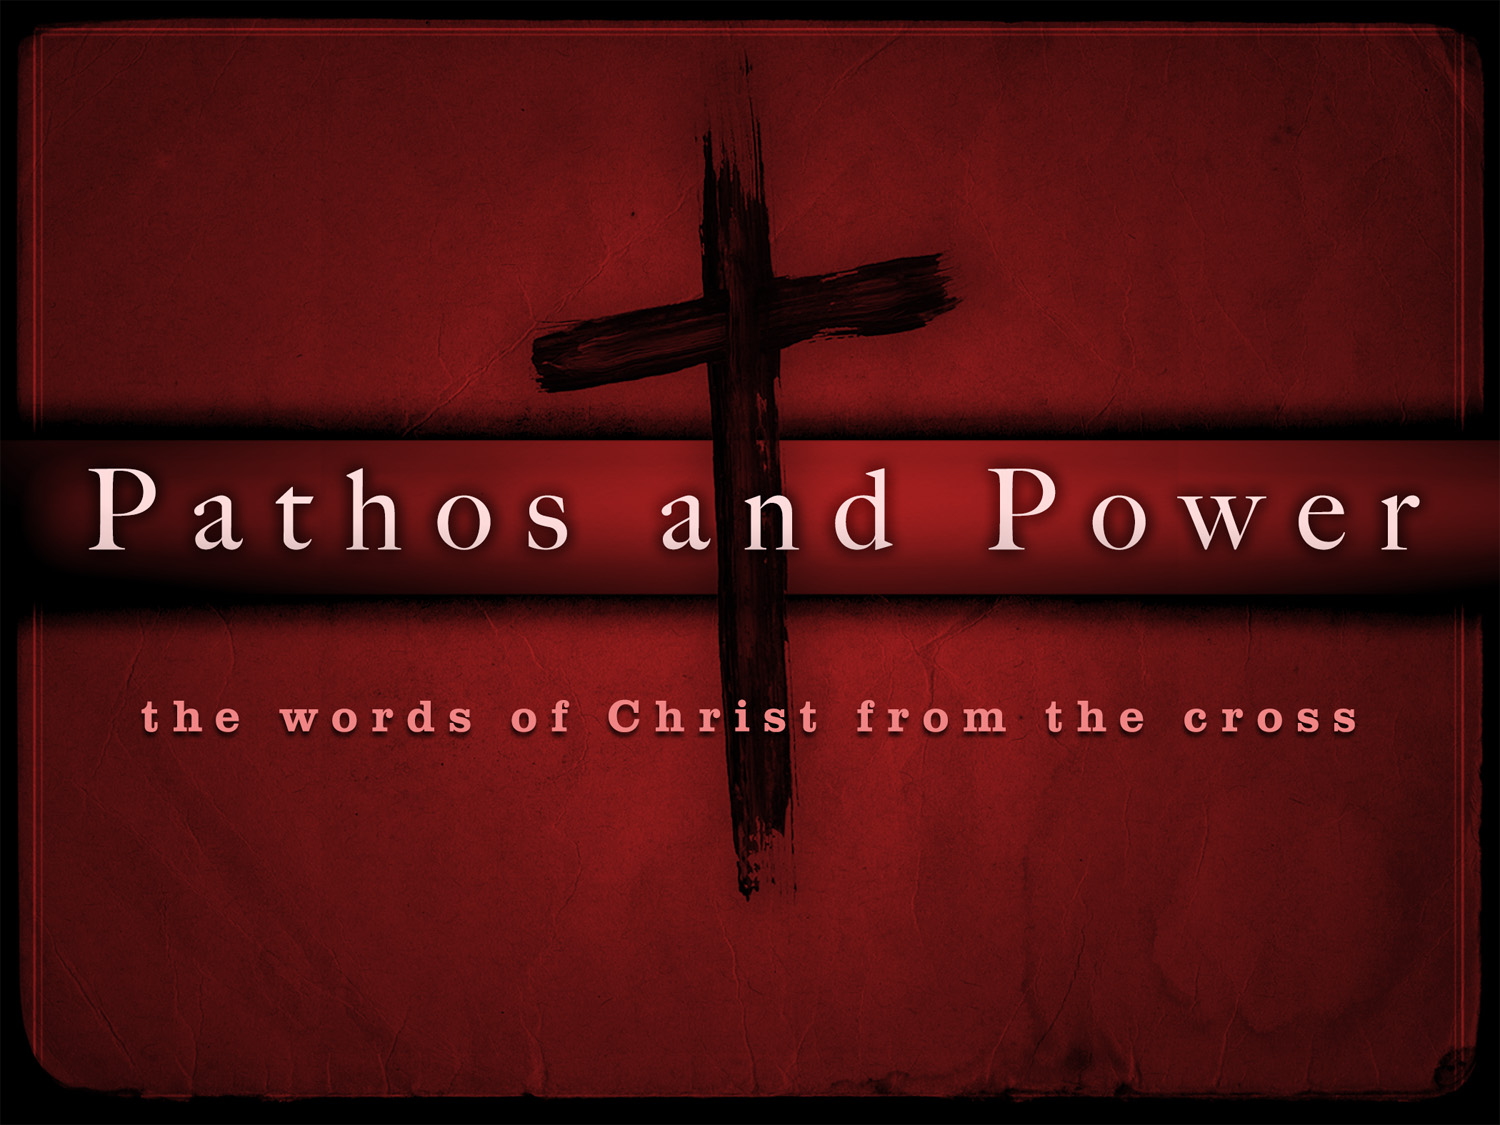 Pathos and Power: Easter Sunday